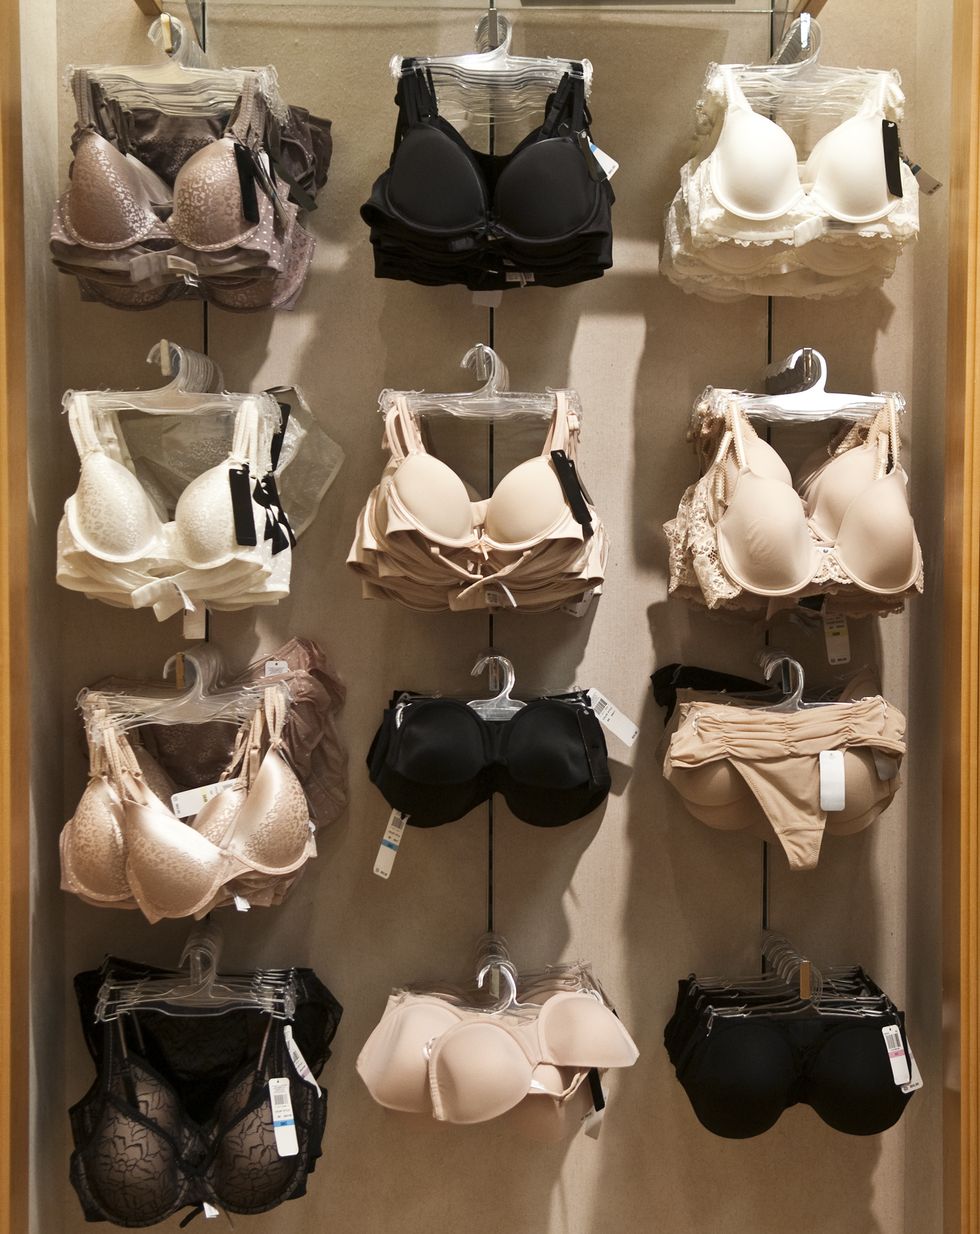 MARKS & SPENCERS BRA FITTING SERVICE. GETTING